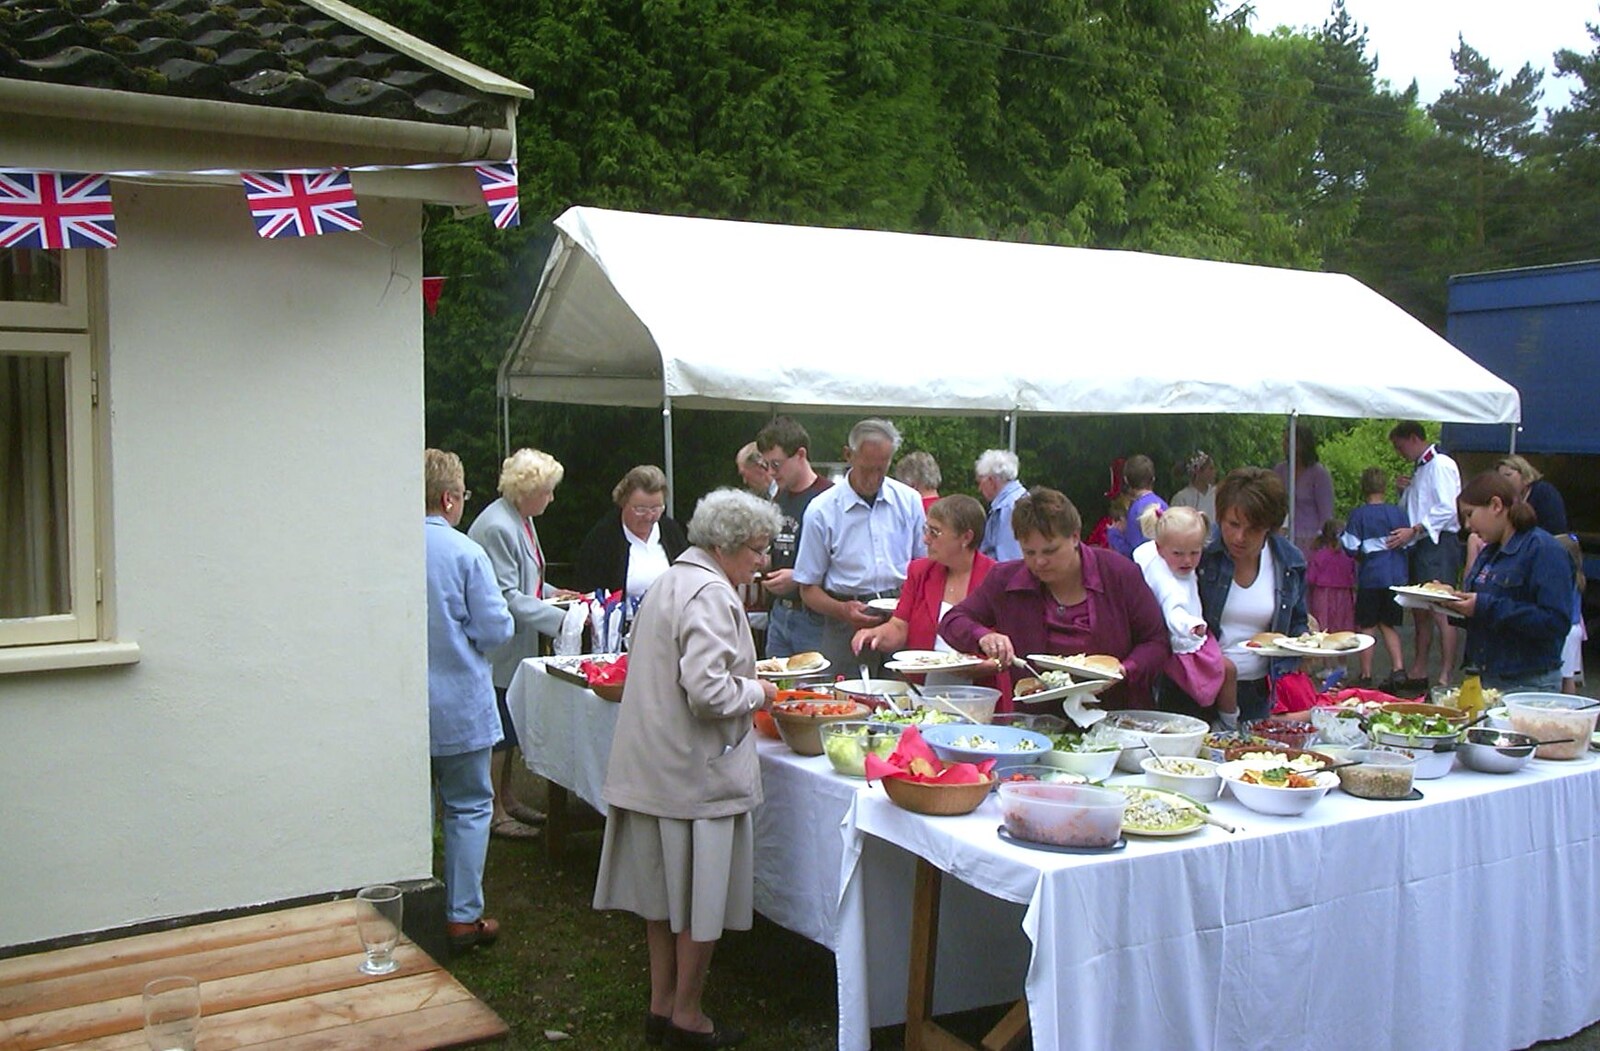 More outdoor eating from Golden Jubilee Celebrations, The Village Hall, Brome, Suffolk - 4th June 2002